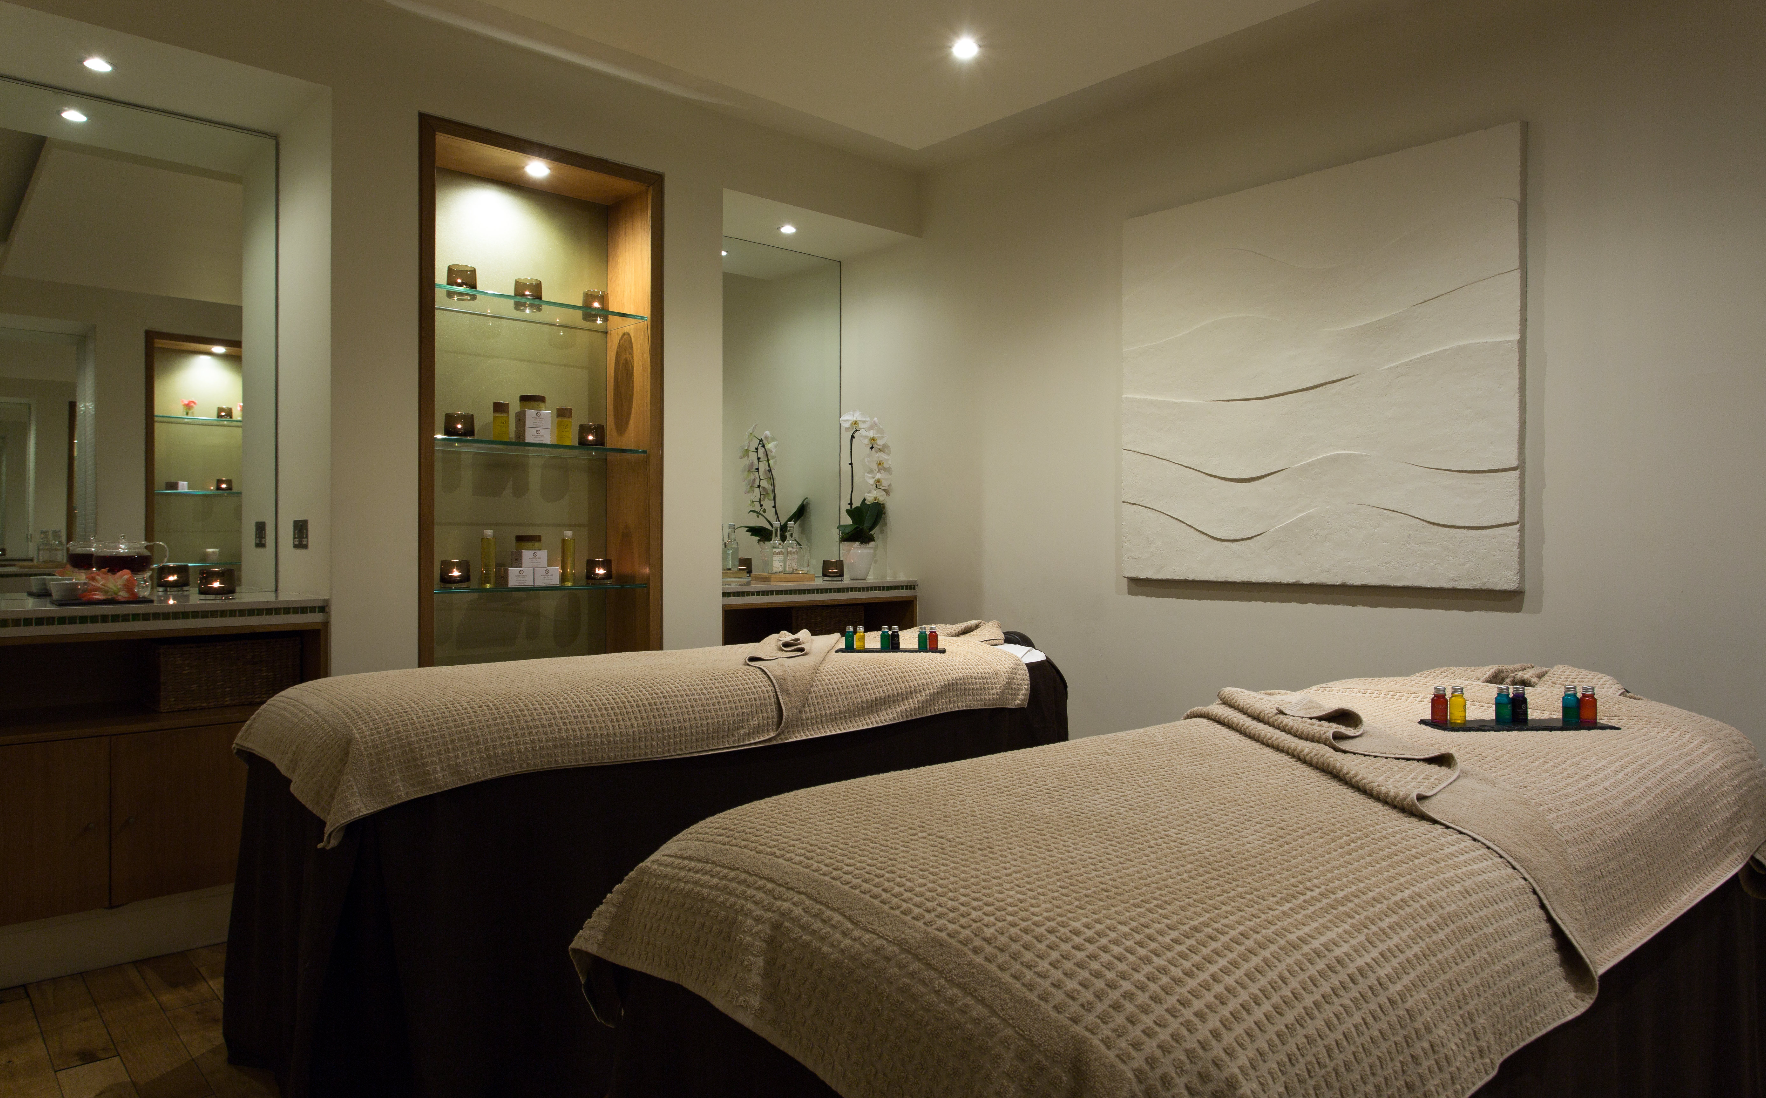 Spa of the Week: The Spa at Brown's Hotel London